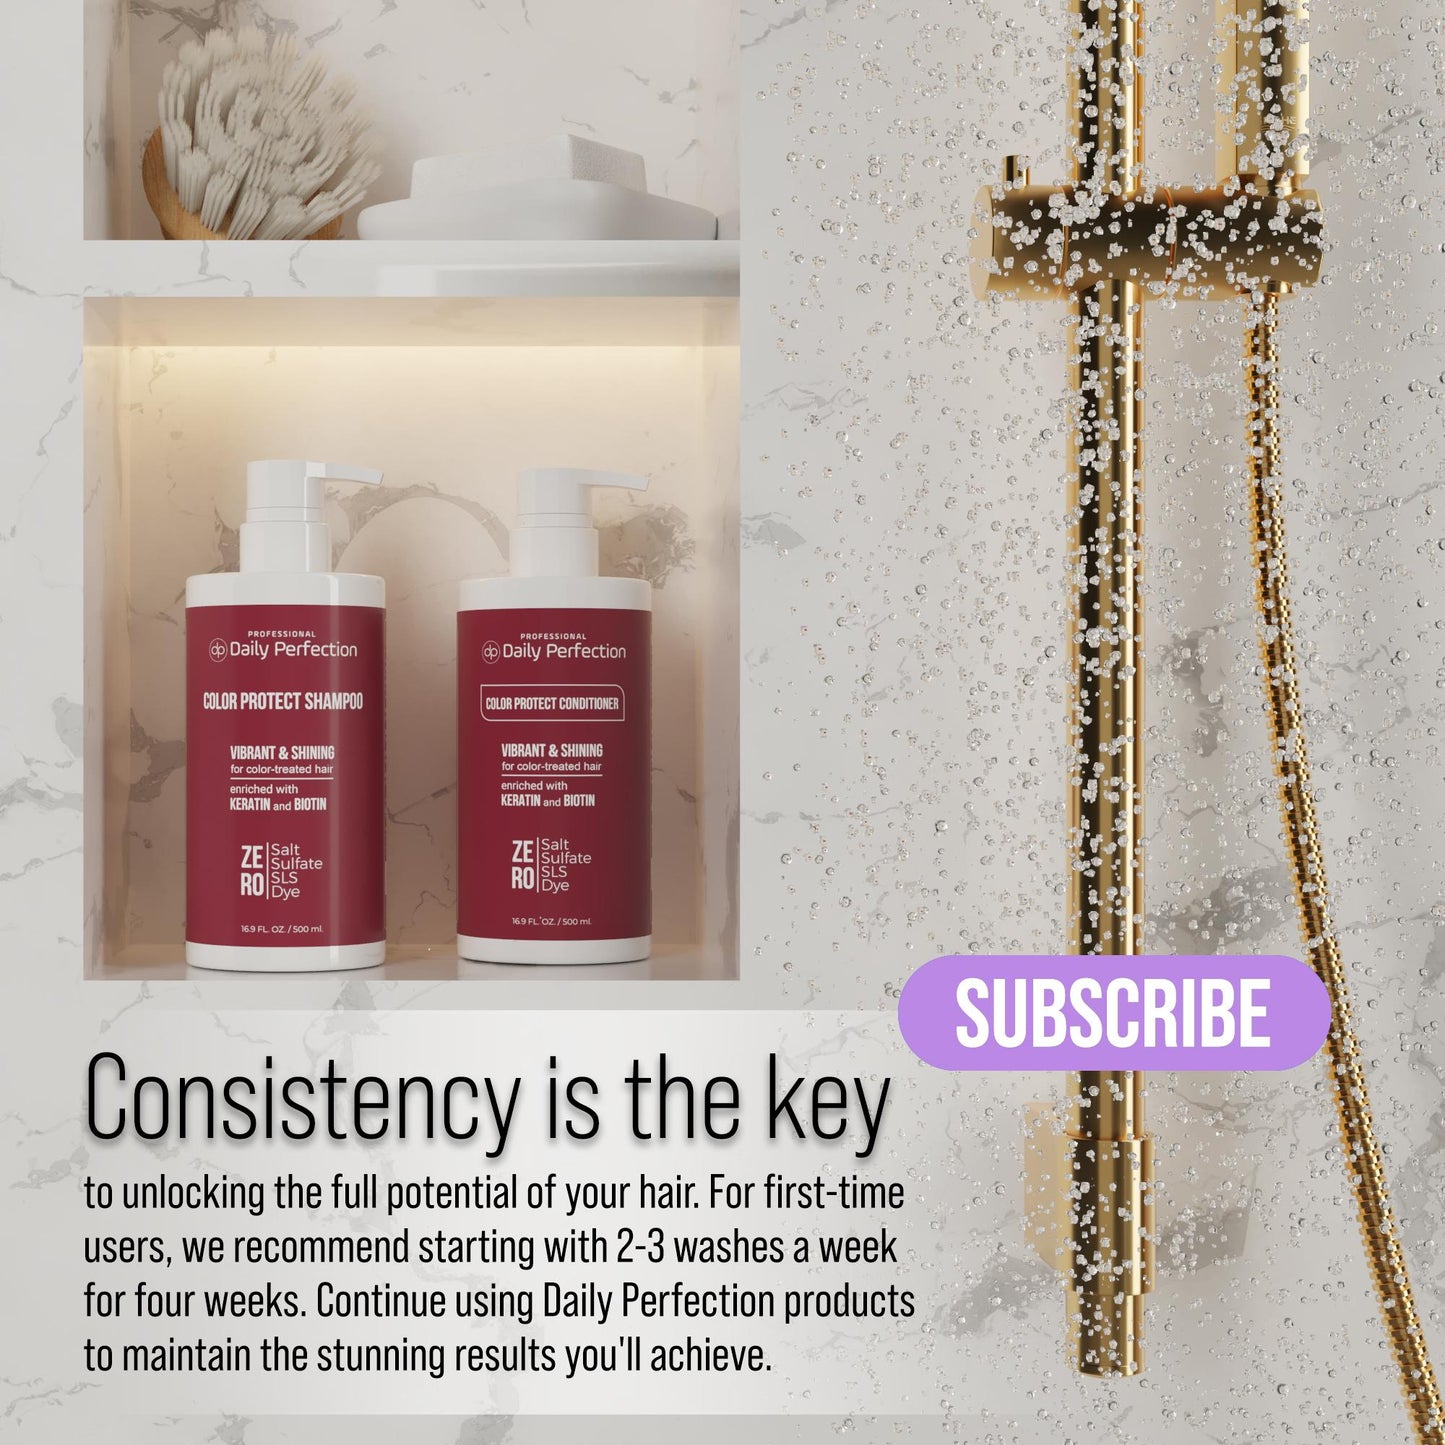 lifestyle image in a shower with a message that explains the importance of consistency in using hair care products along with  the product bottle of Daily Perfection Color Protect Conditioner